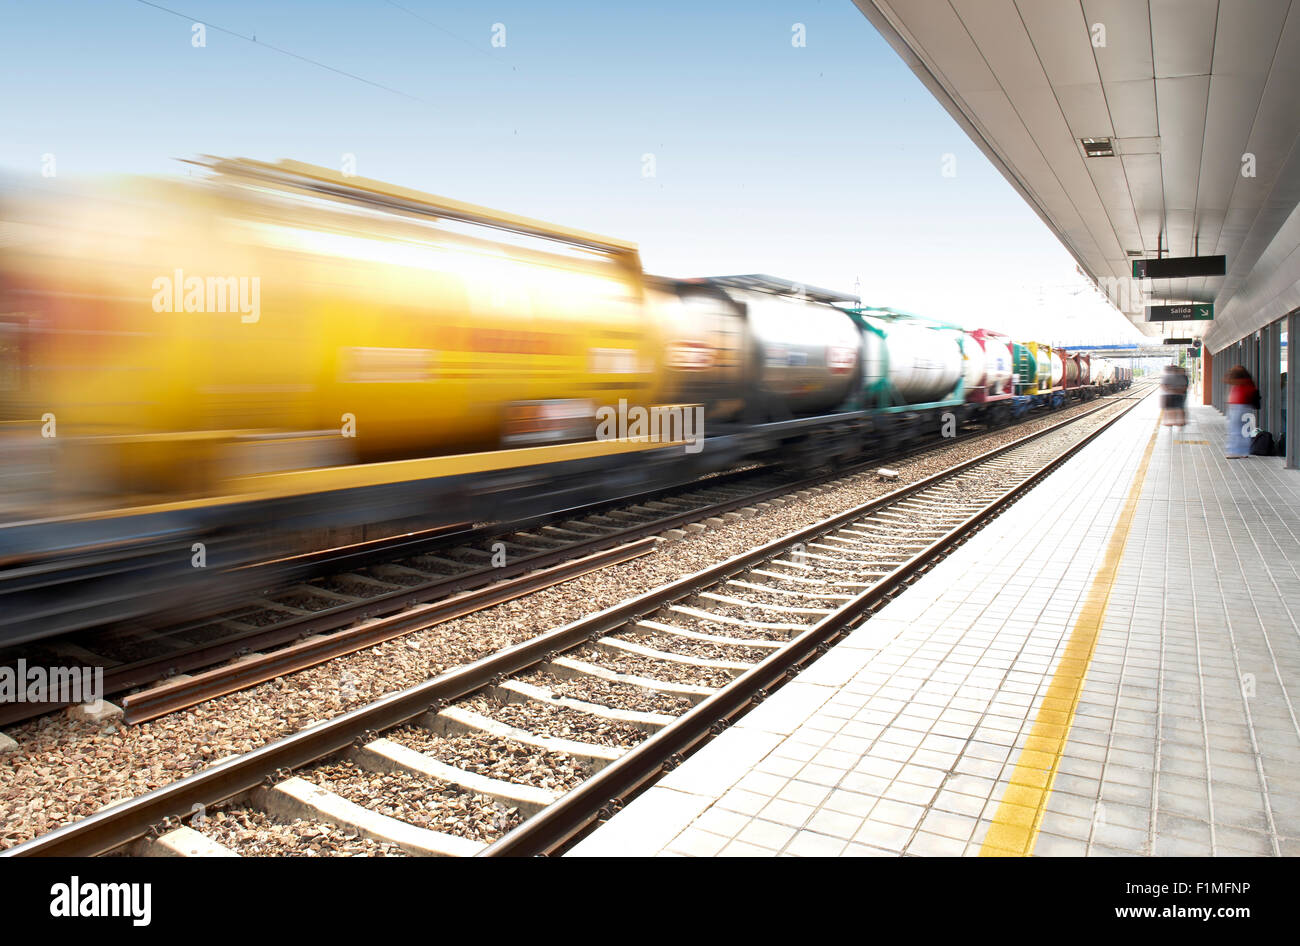 Freight train in movement on a railway station Stock Photo